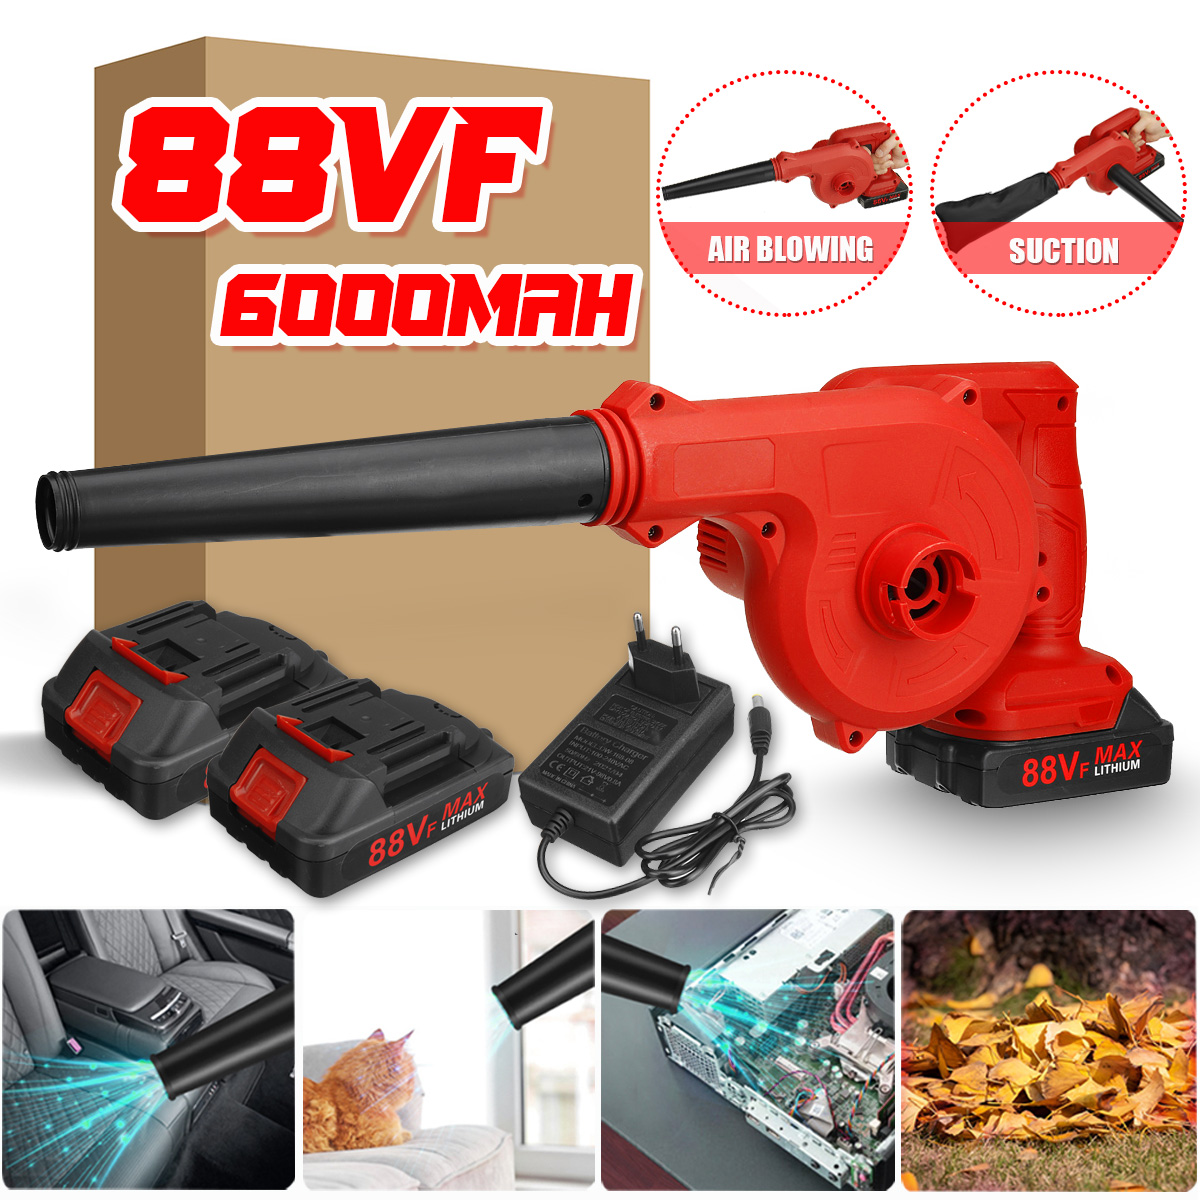 88VF-Garden-Cordless-Air-Blower-Vacuum-Cleaner-Blower-For-Dust-Blowing-W-None12pcs-Battery-Also-for--1851657-3